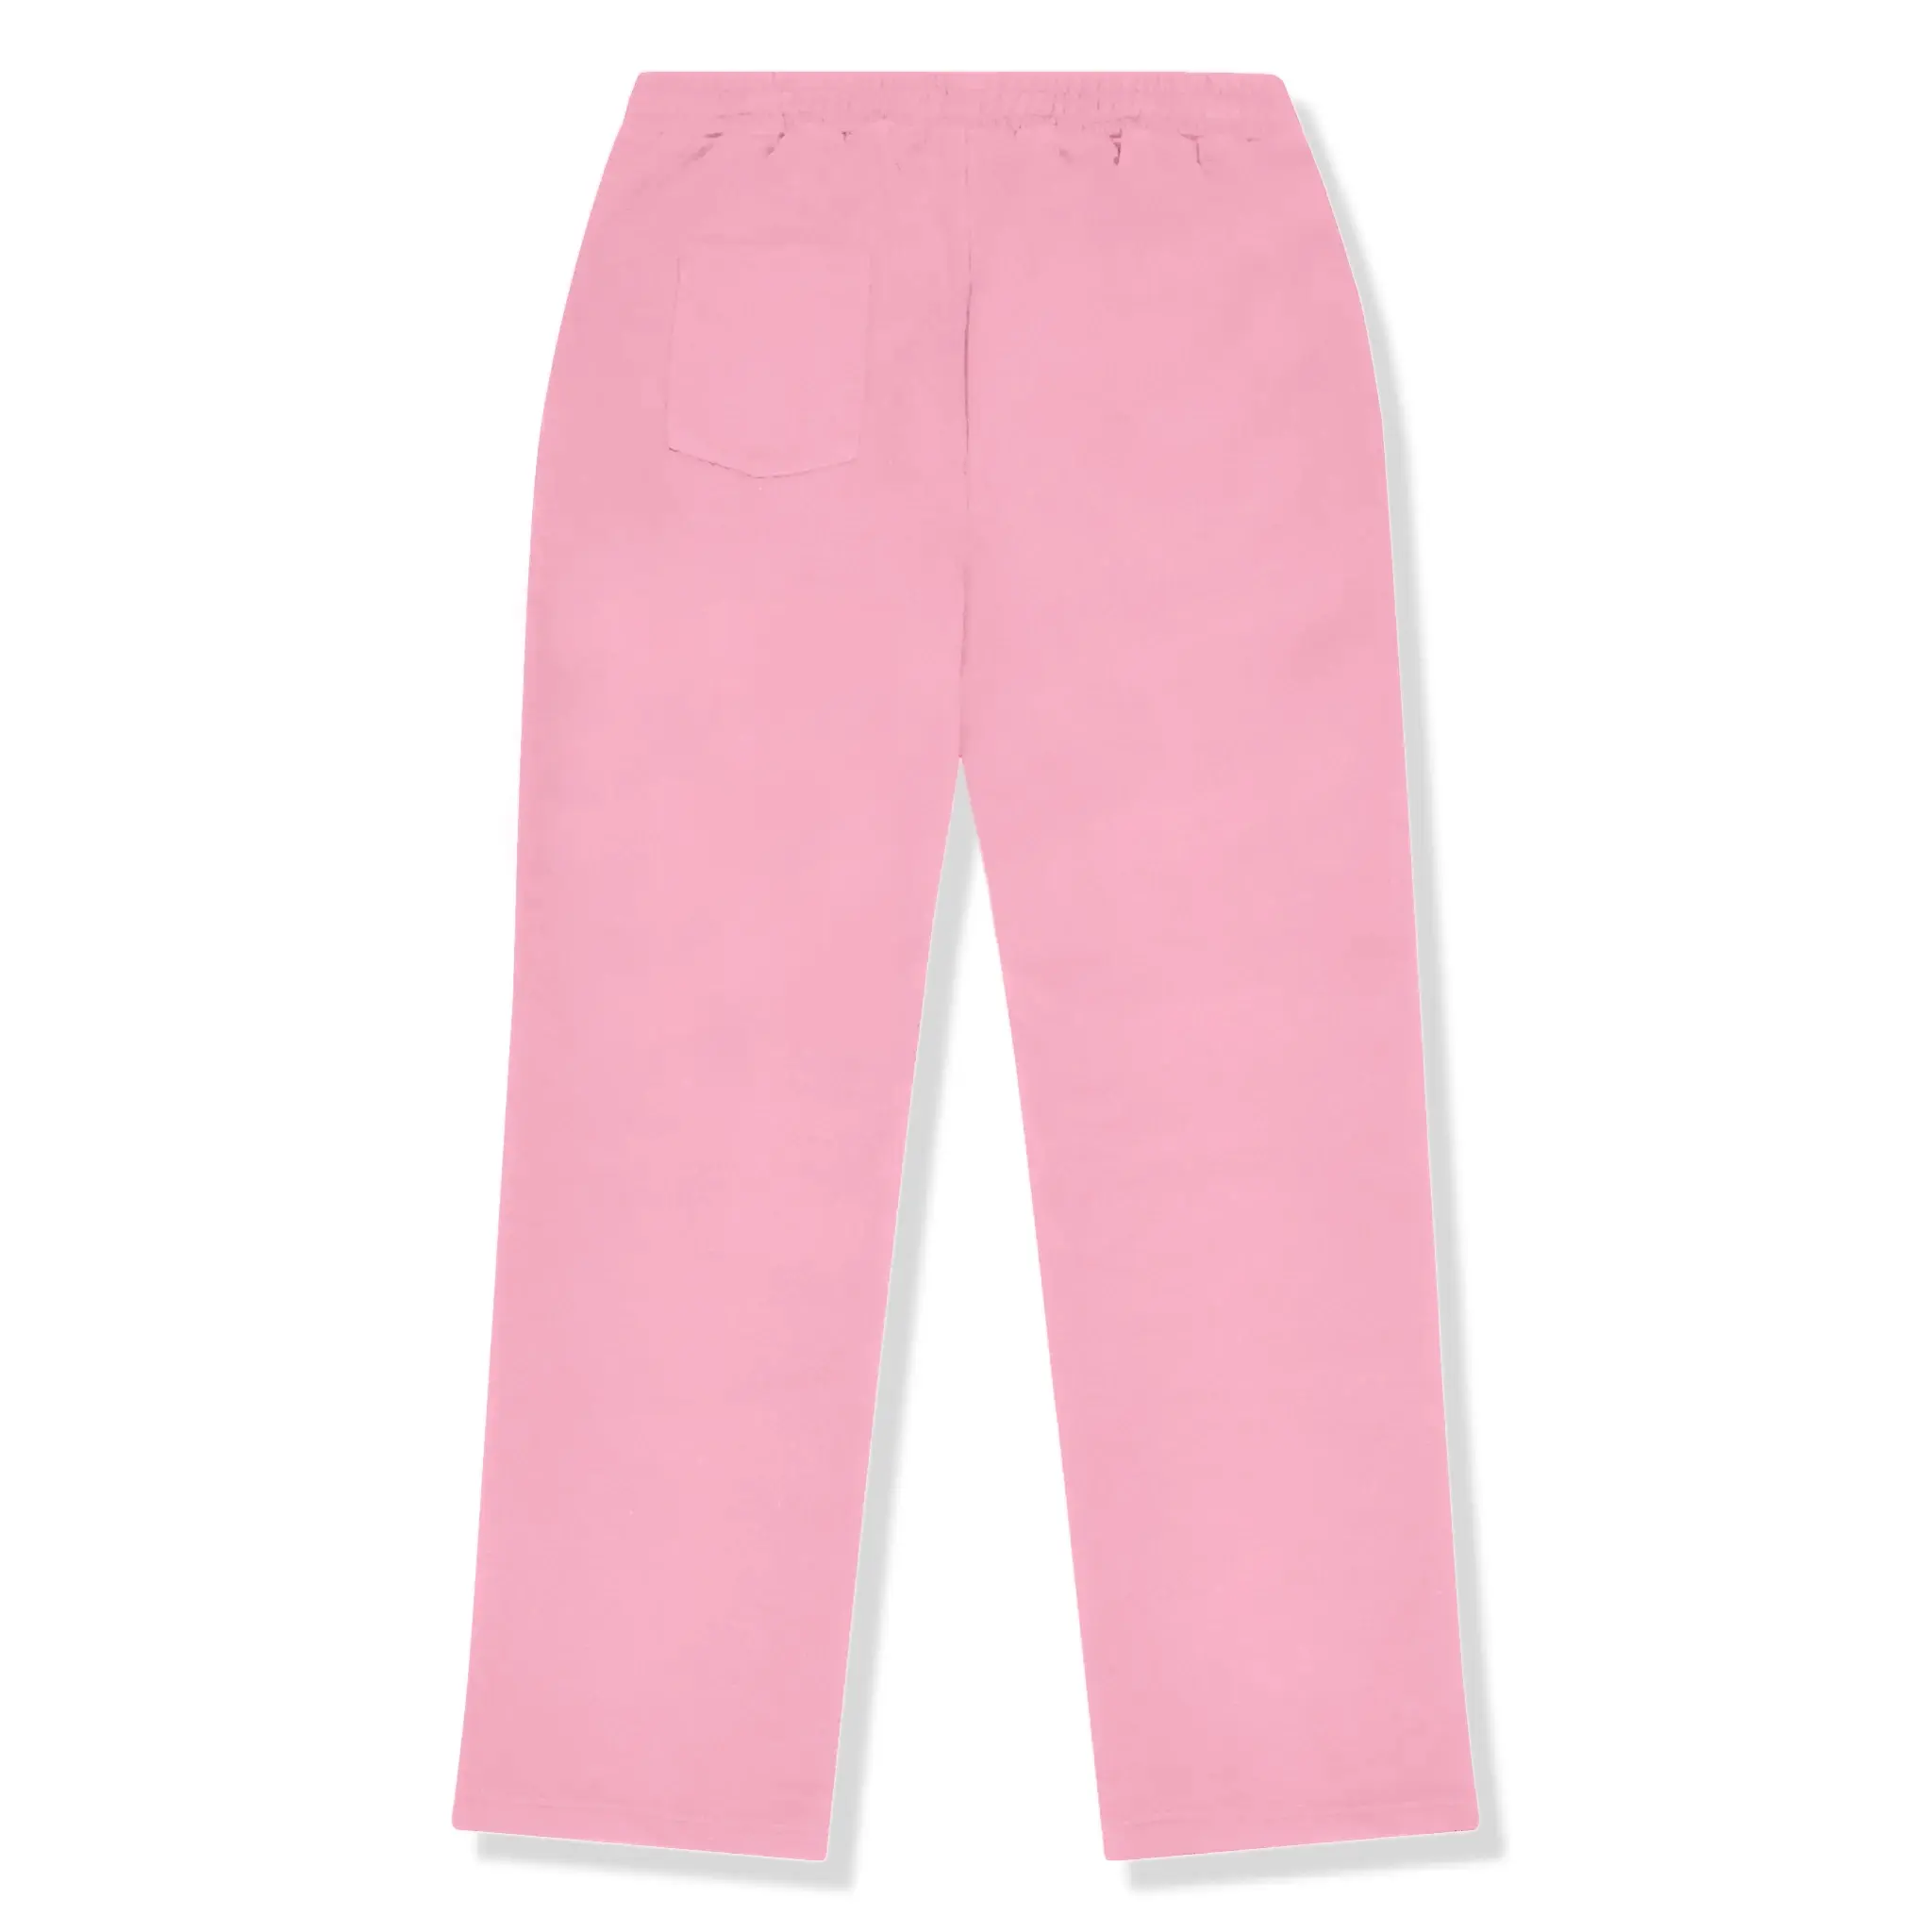 Back view of Carsicko London Pink Track Pants